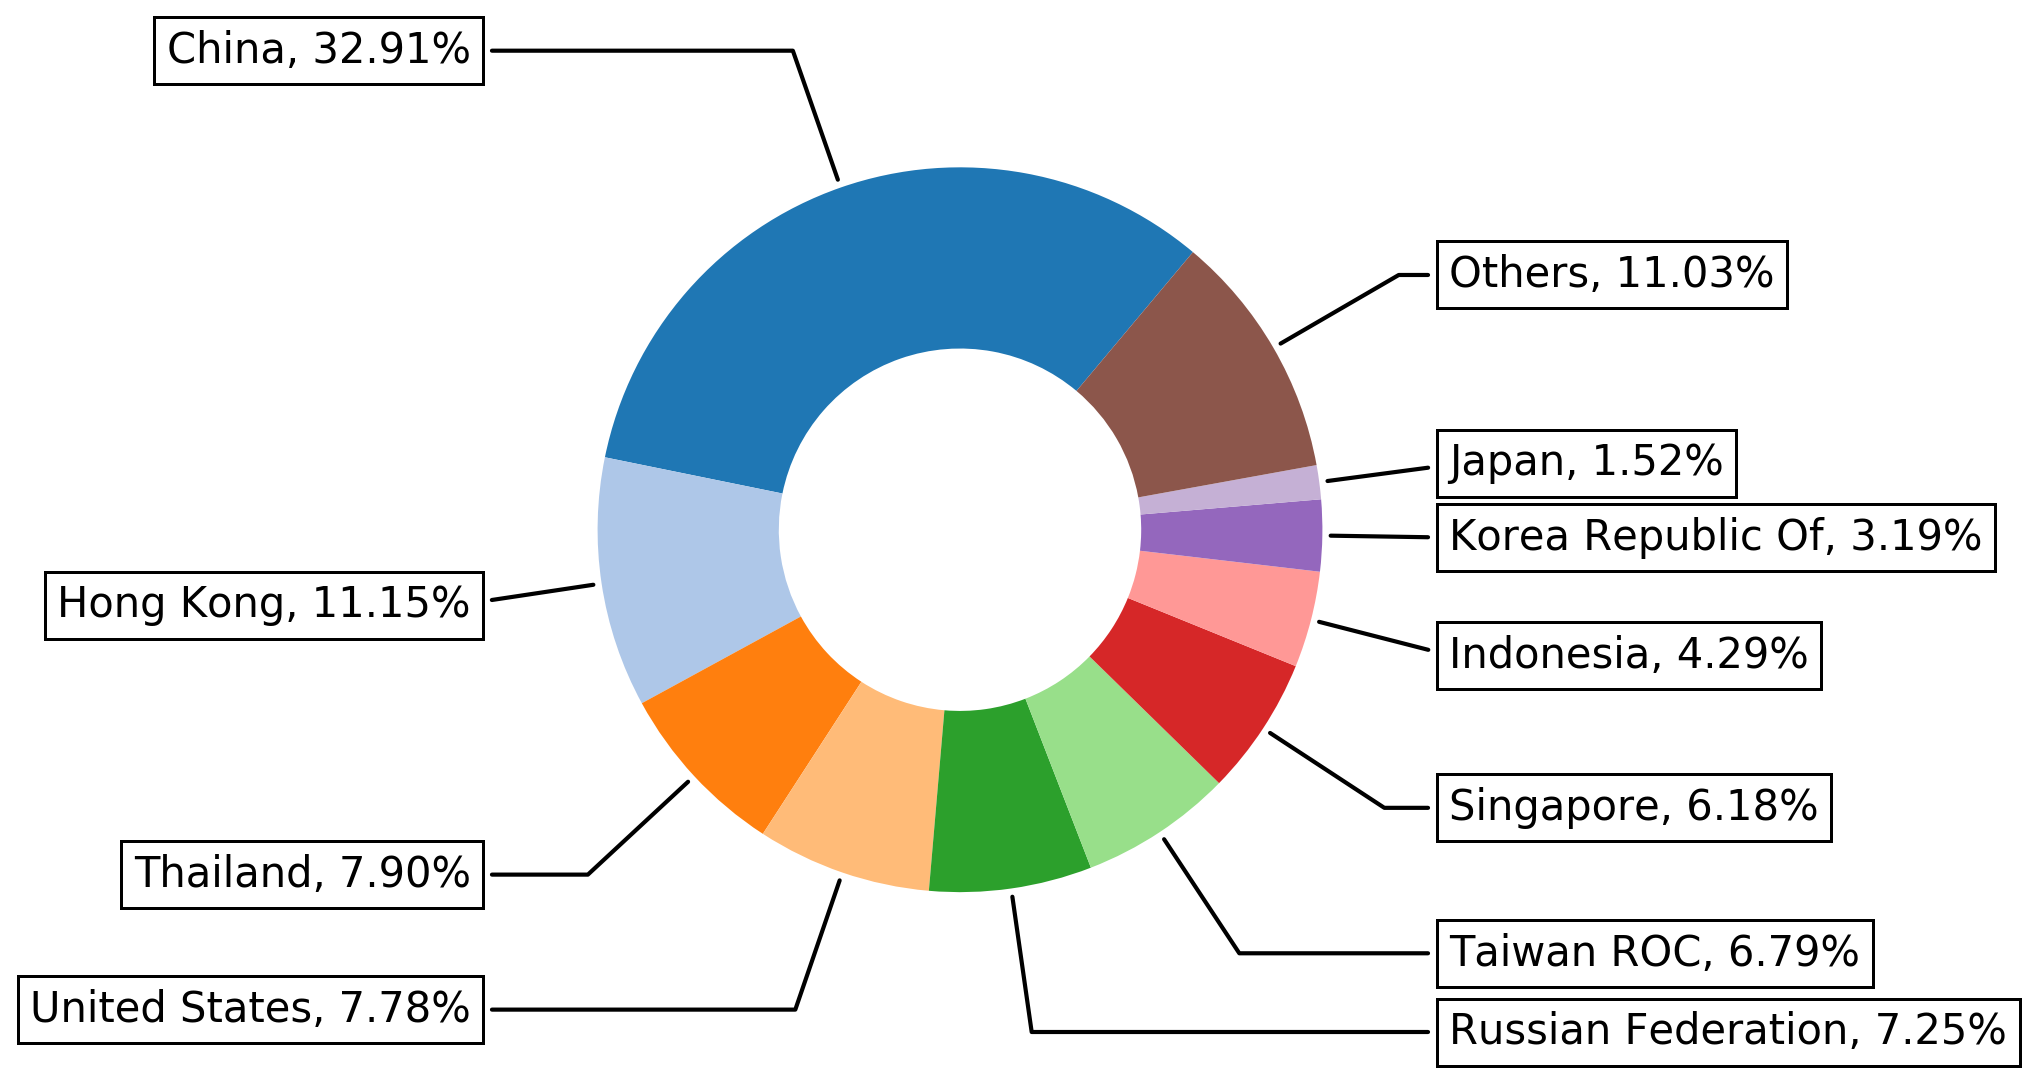 Top 10 countries where attacks exploiting CVE-2012-2311 and CVE-2012-1823 come from: China - 32.91%, Hong Kong - 11.15%, Thailand - 7.90%, United States - 7.78%, Russian Federation - 7.25%, Taiwan ROC - 6.79%, Singapore - 6.18%, Indonesia - 4.29%, Korea - 3.19%, Japan - 1.52%, Others - 11.03%